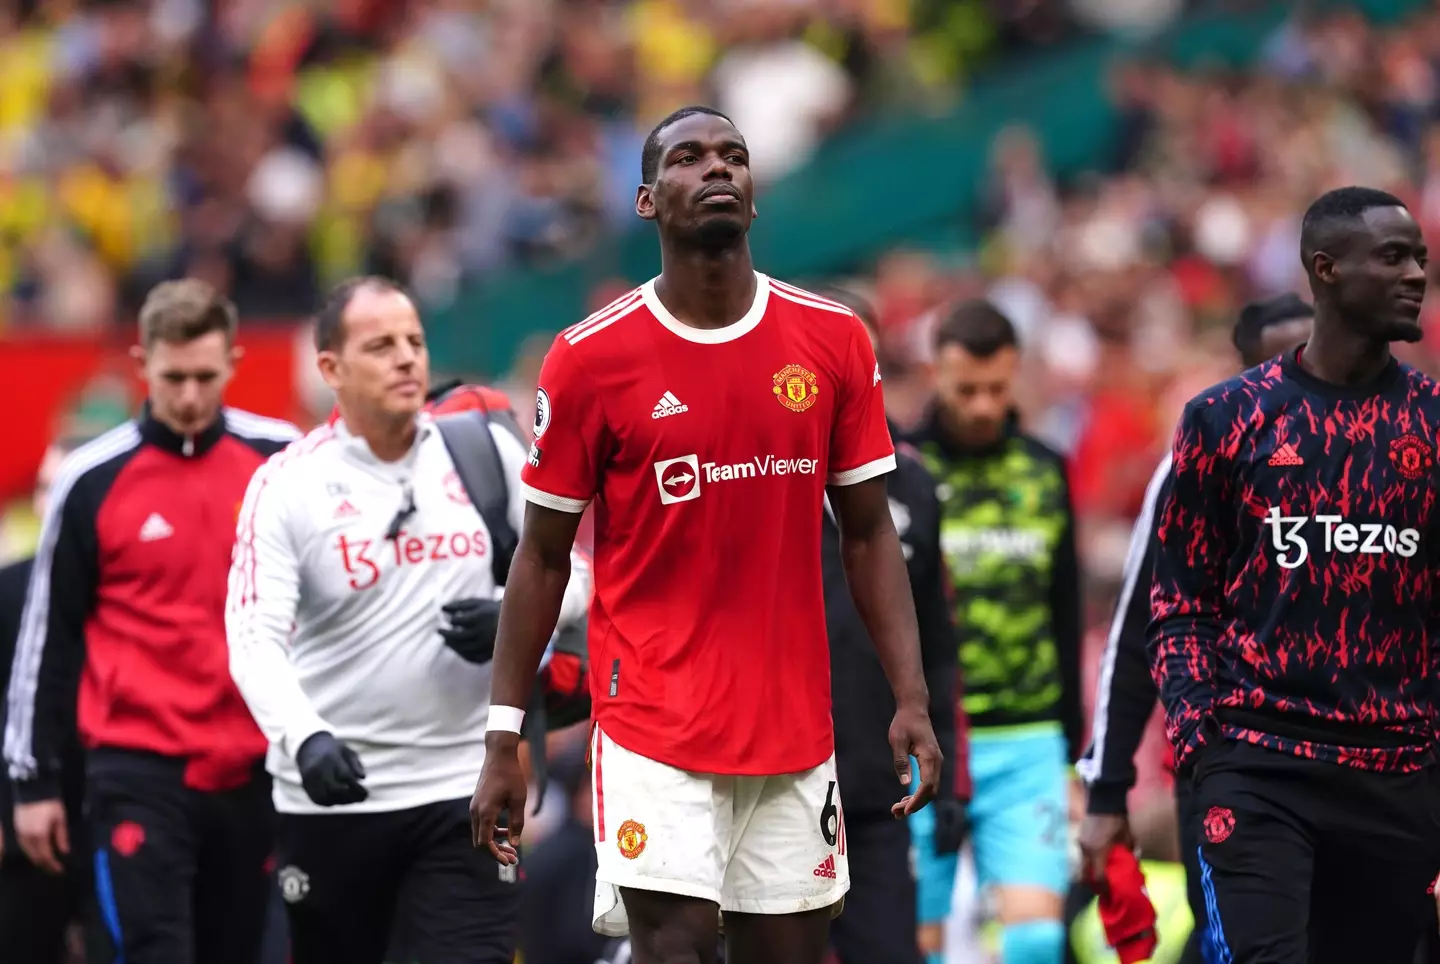 Paul Pogba was booed by Manchester United fans on Saturday (Image: PA)